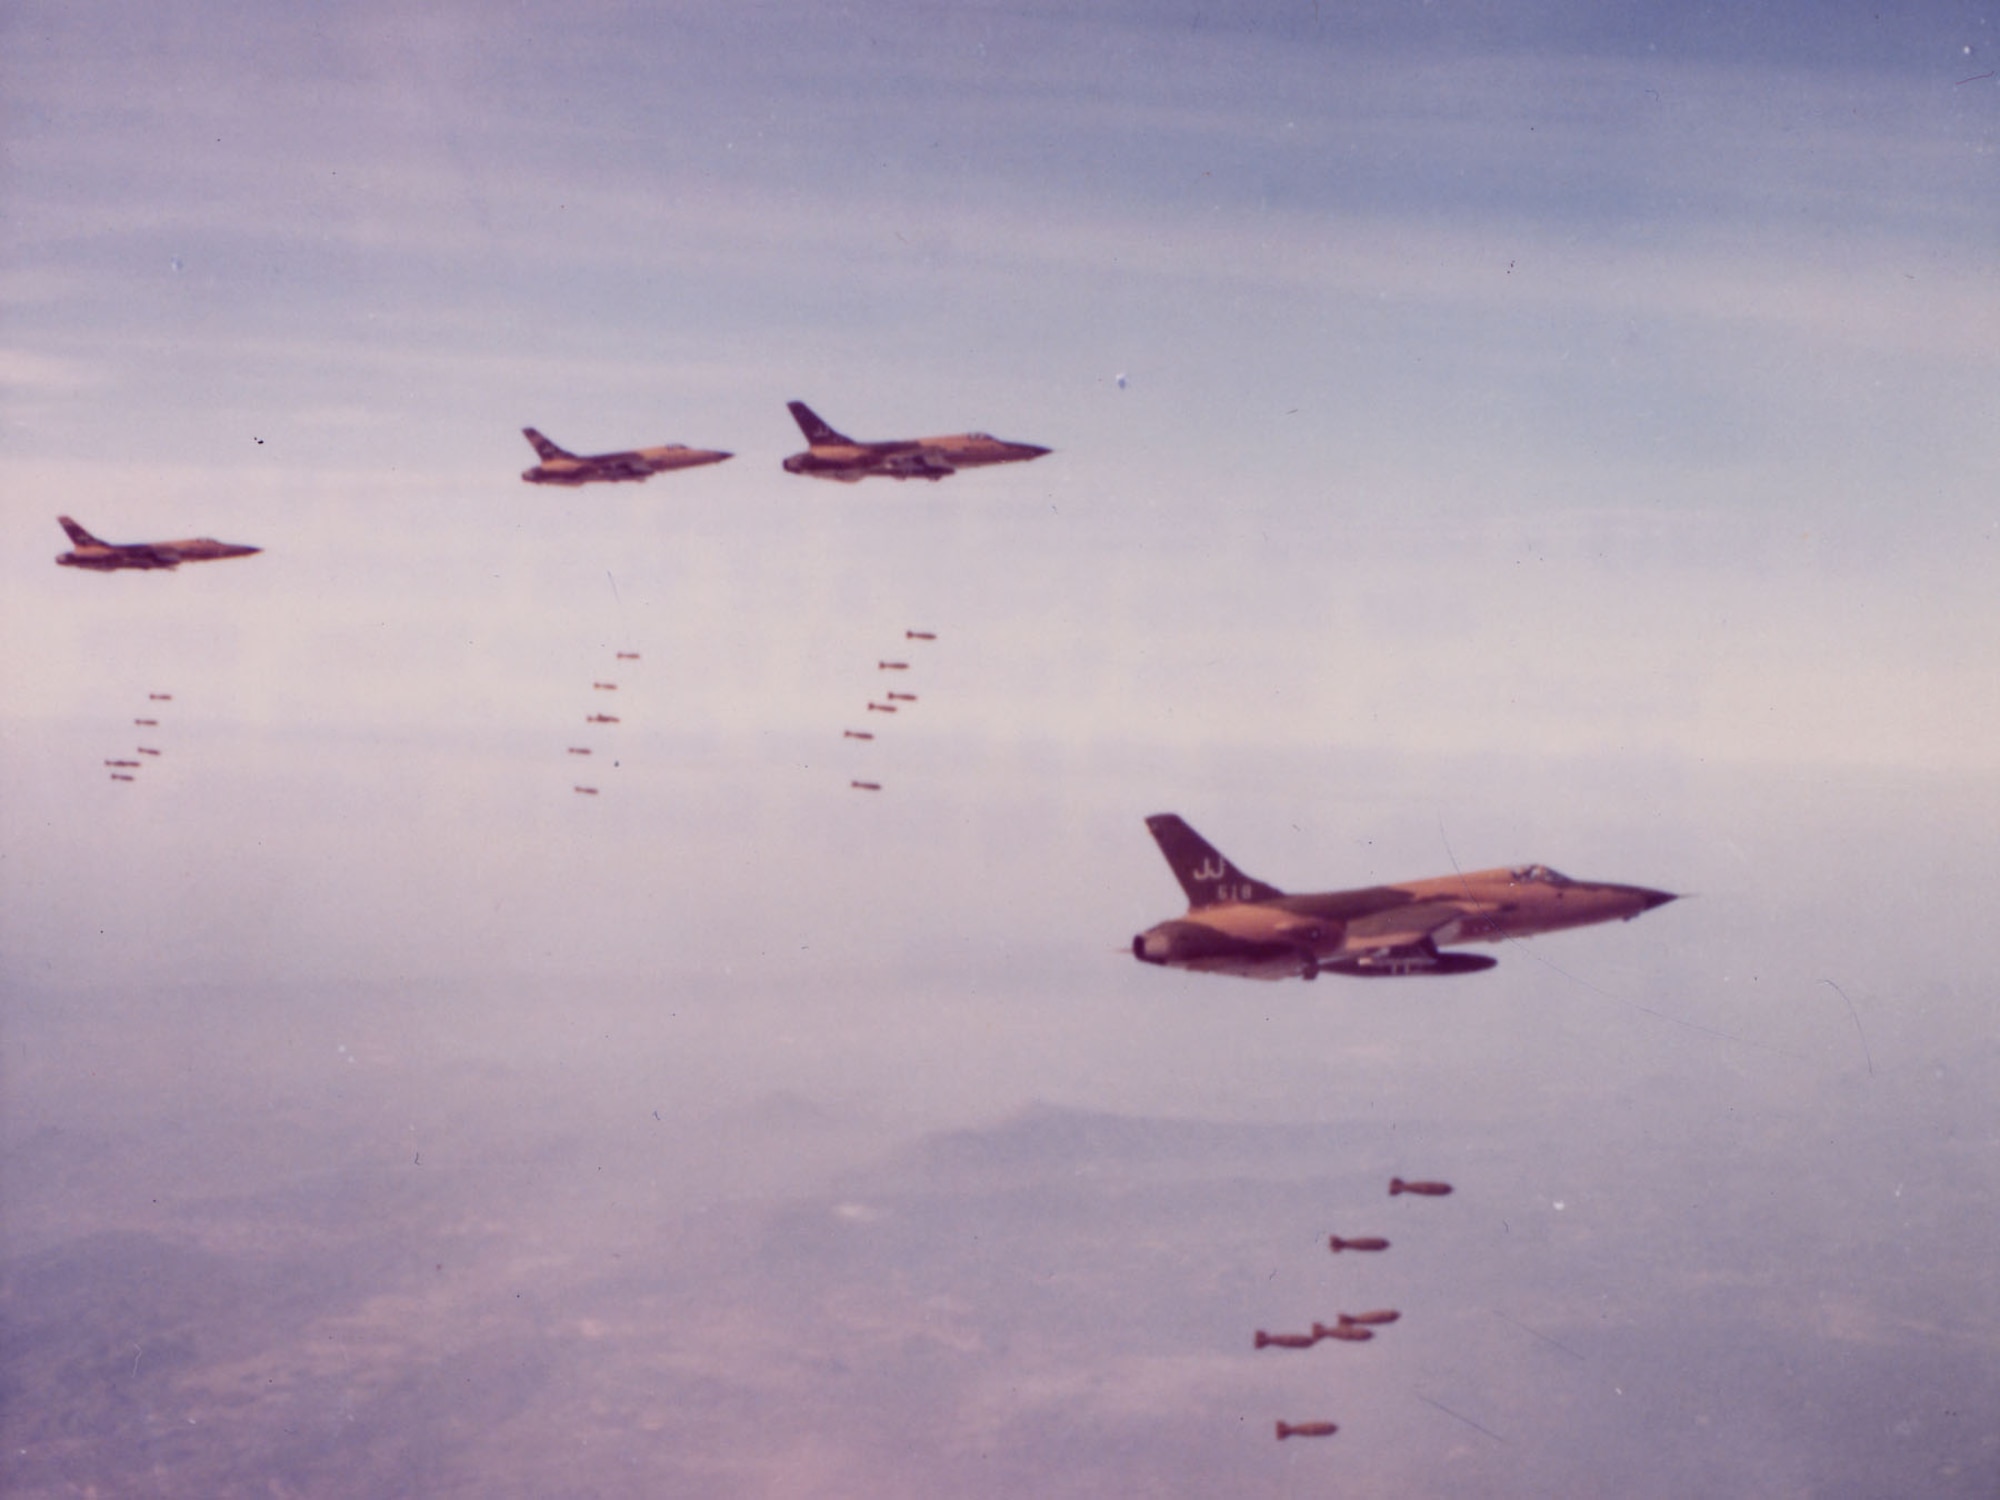 F-105 crews played a key role in ROLLING THUNDER. (U.S. Air Force photo)